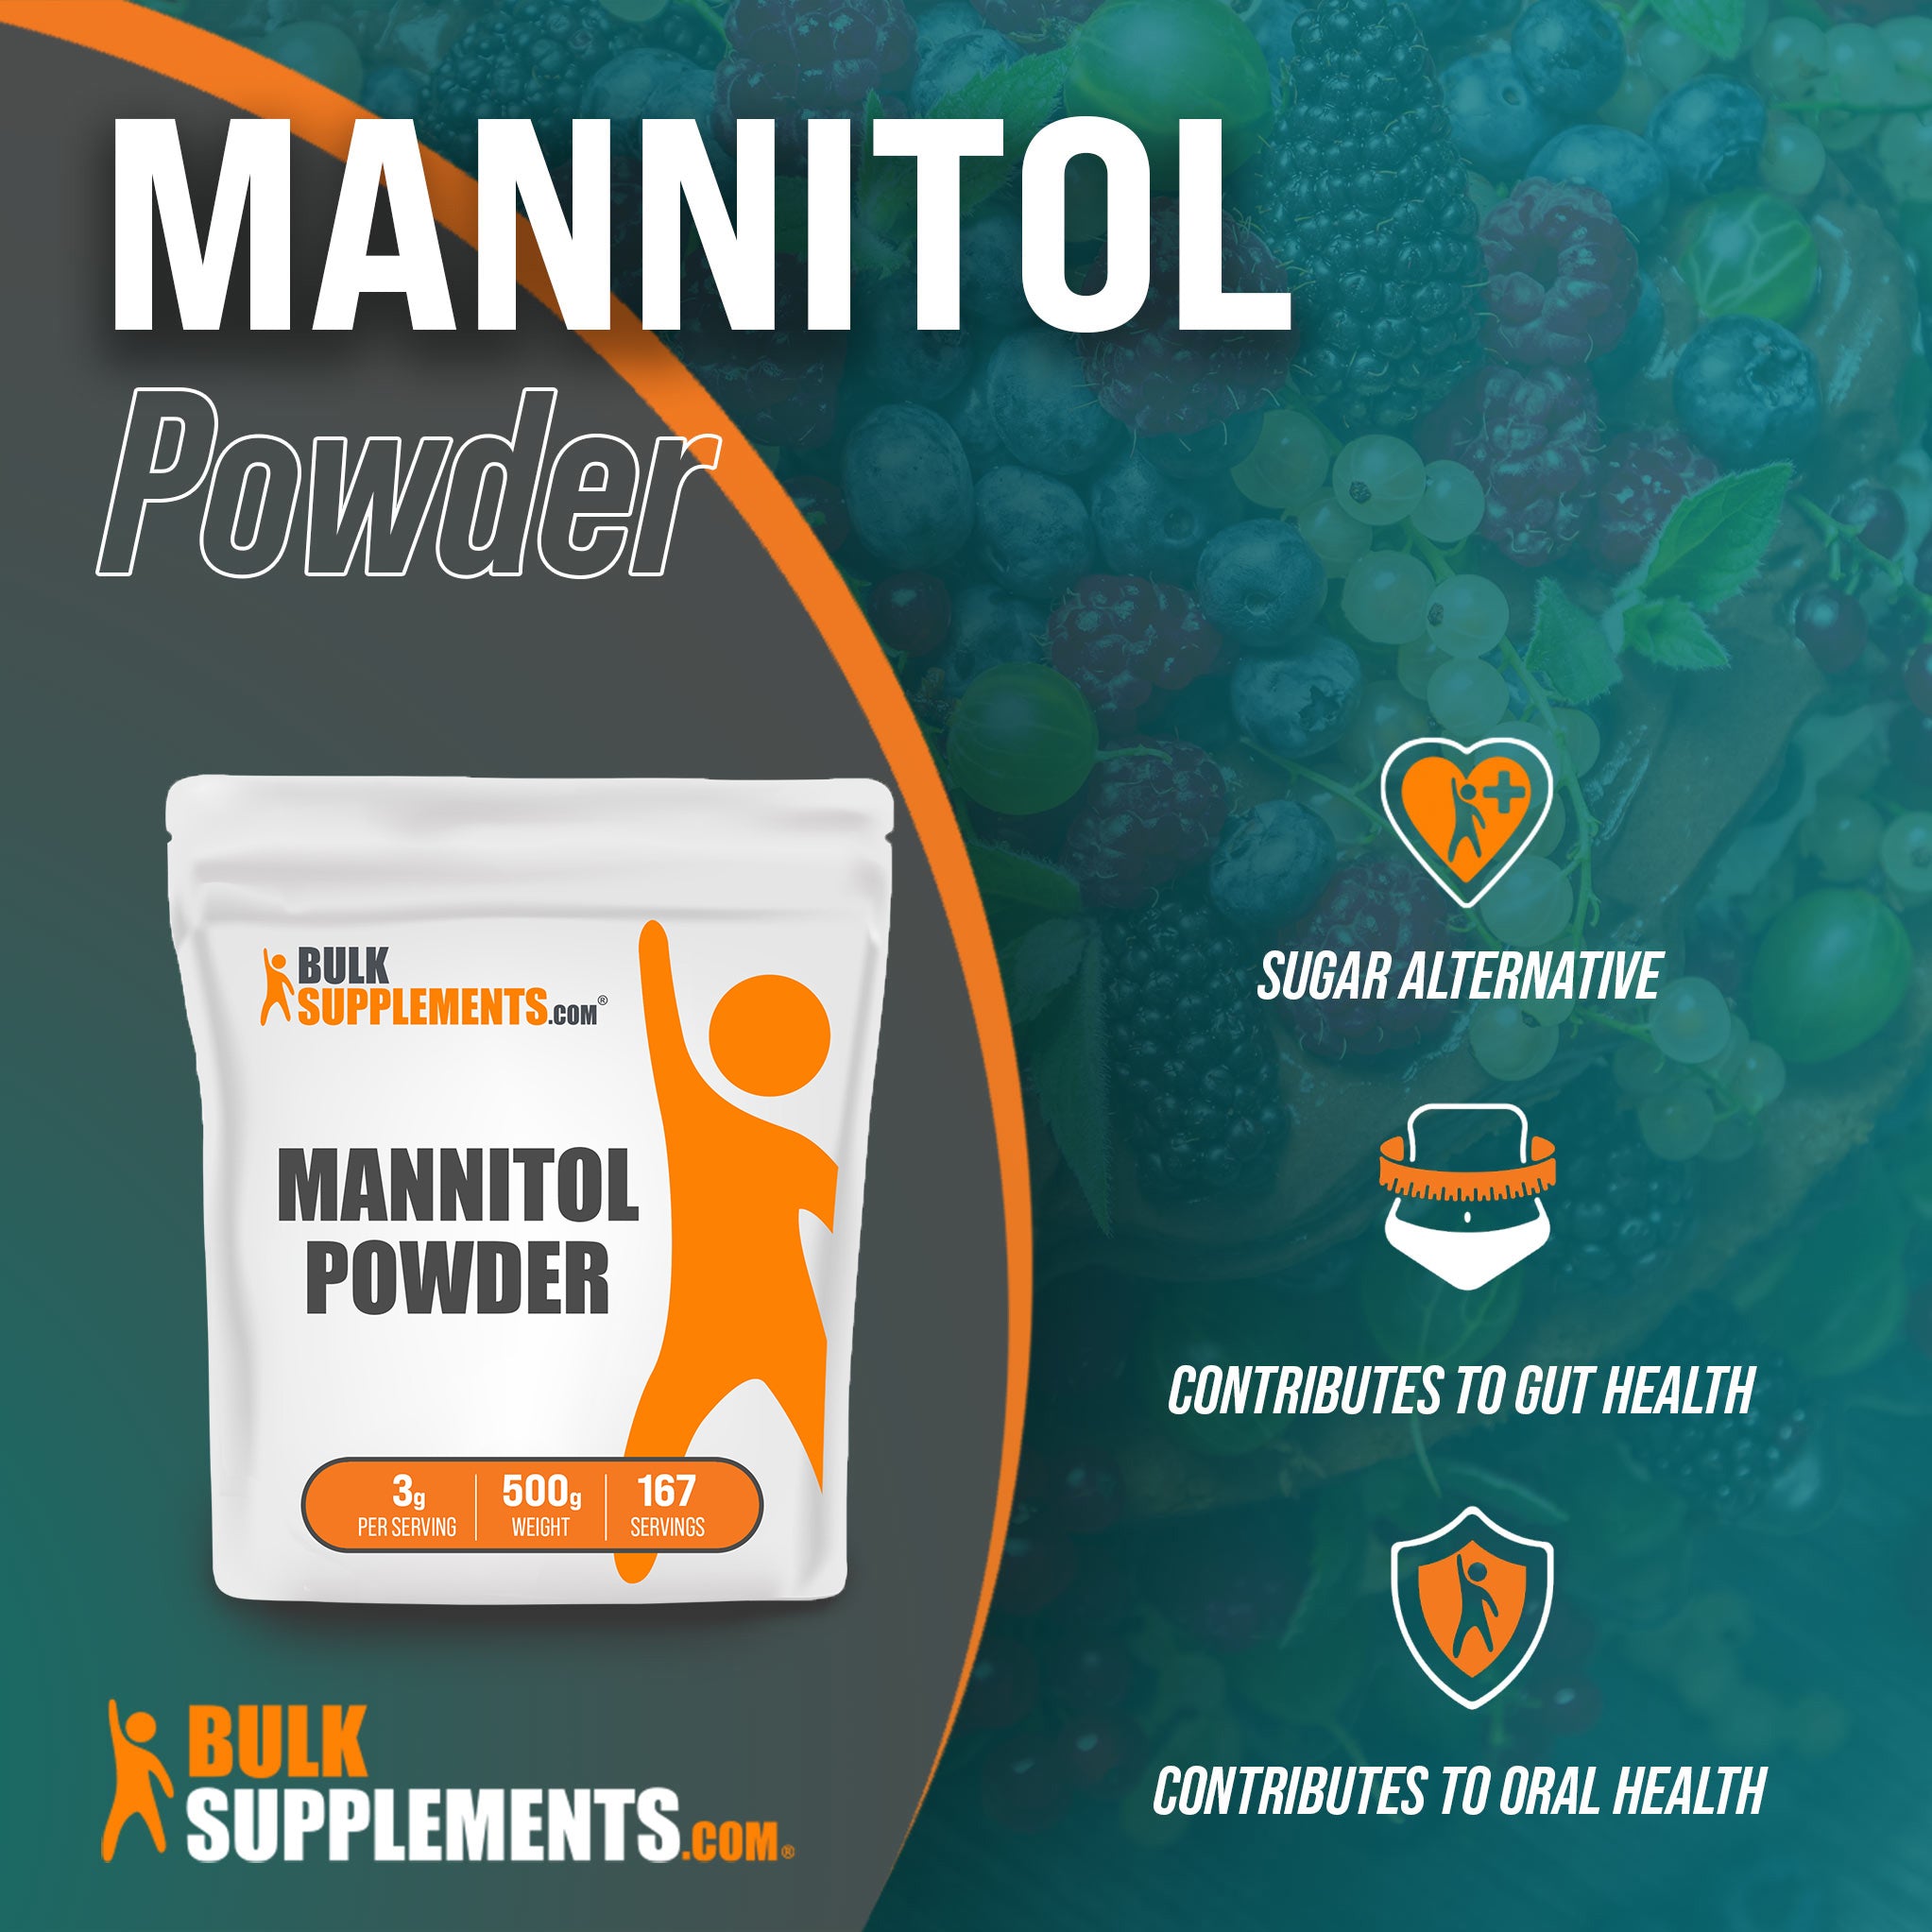 Benefits of Mannitol: sugar alternative, contributes to gut health, contributes to oral health